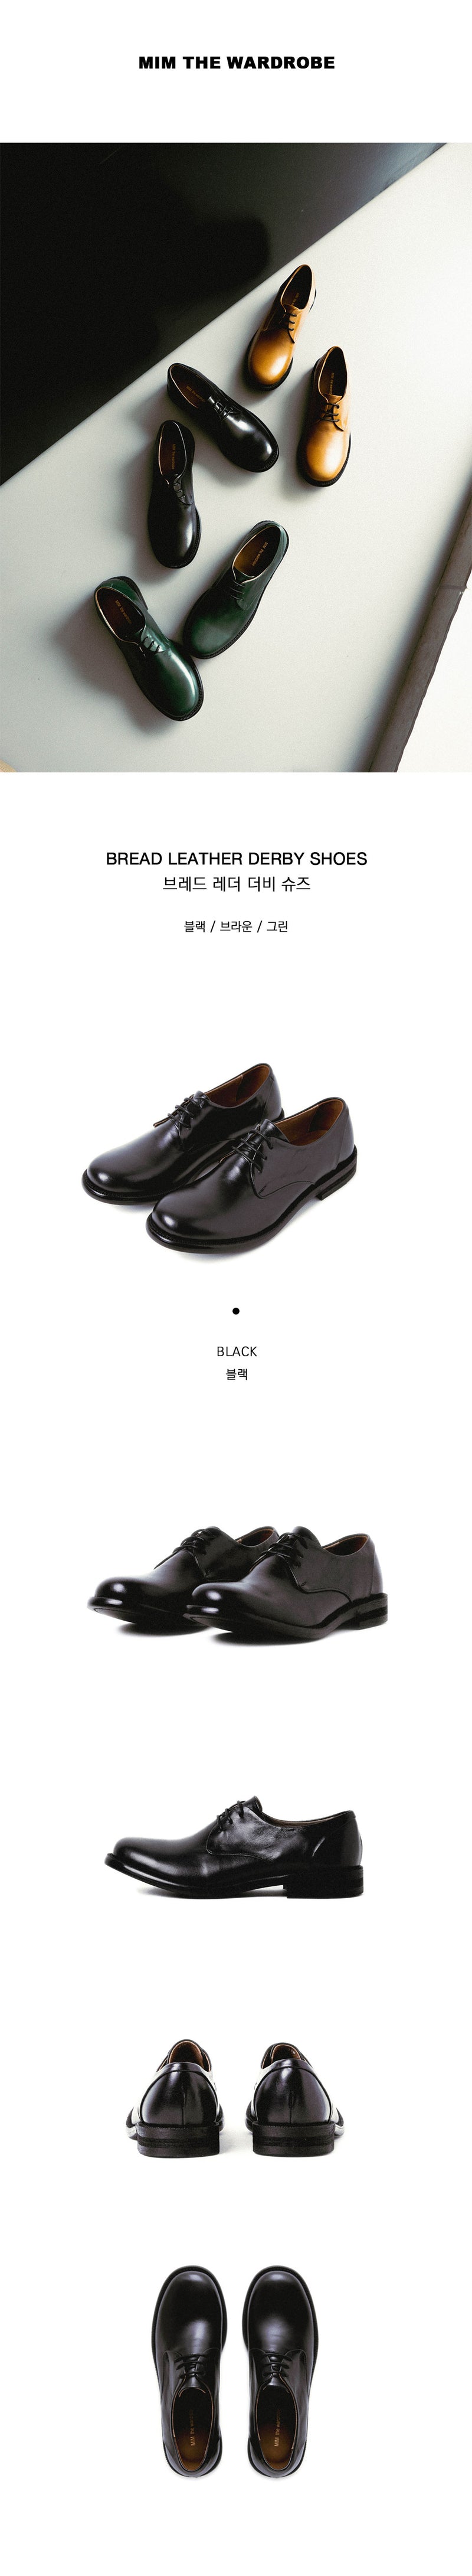 BREAD LEATHER DERBY SHOES BLACK